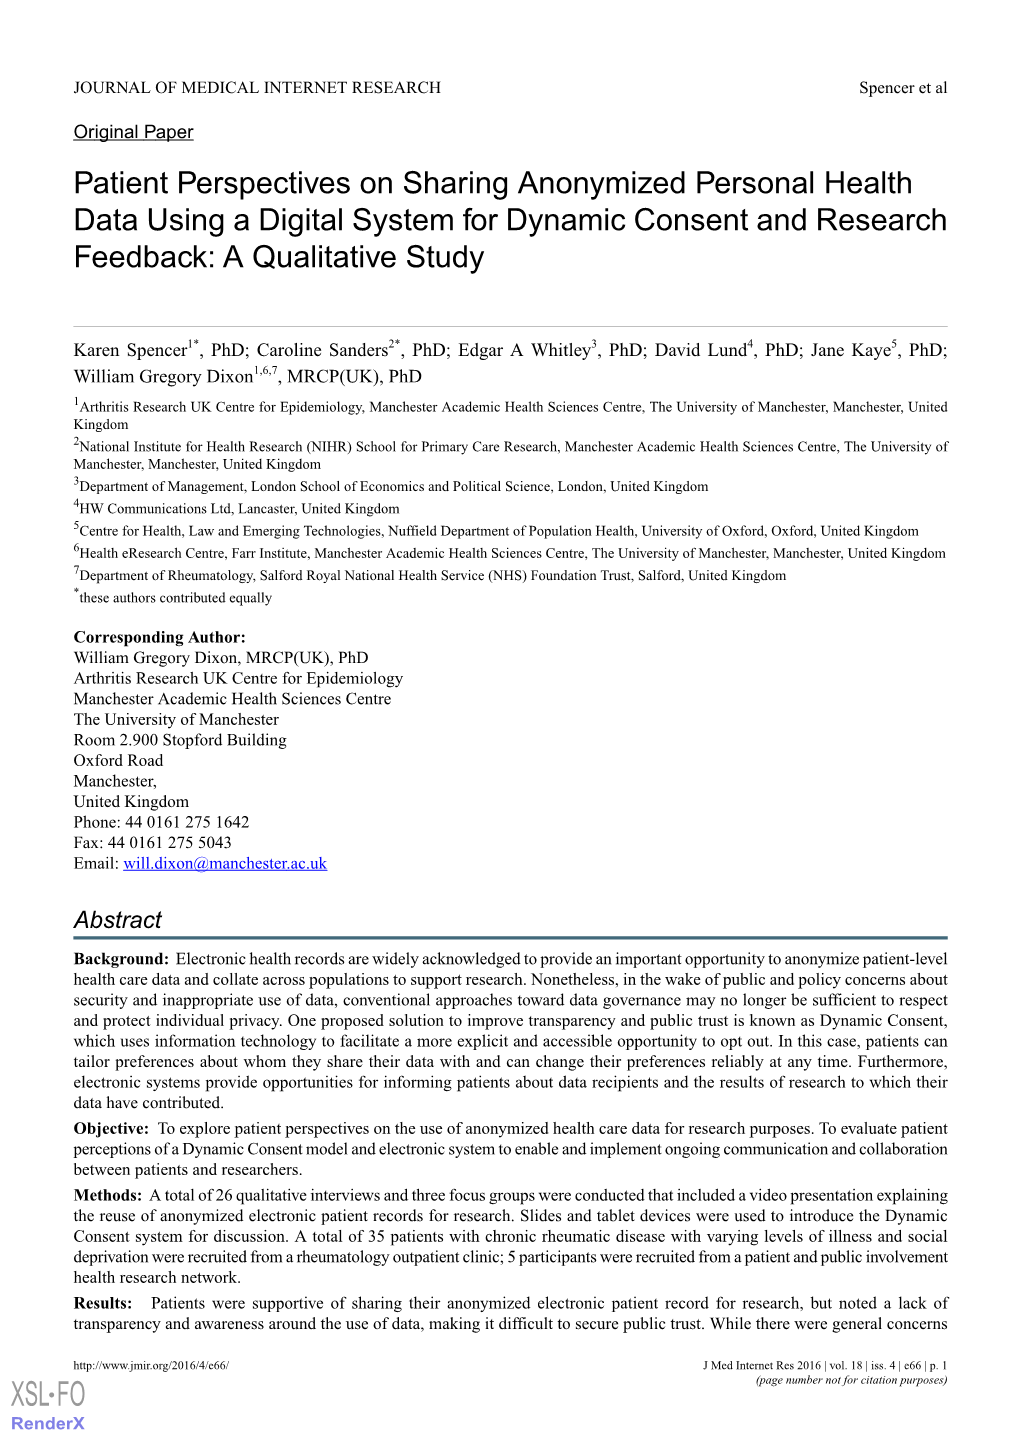 Patient Perspectives on Sharing Anonymized Personal Health Data Using a Digital System for Dynamic Consent and Research Feedback: a Qualitative Study